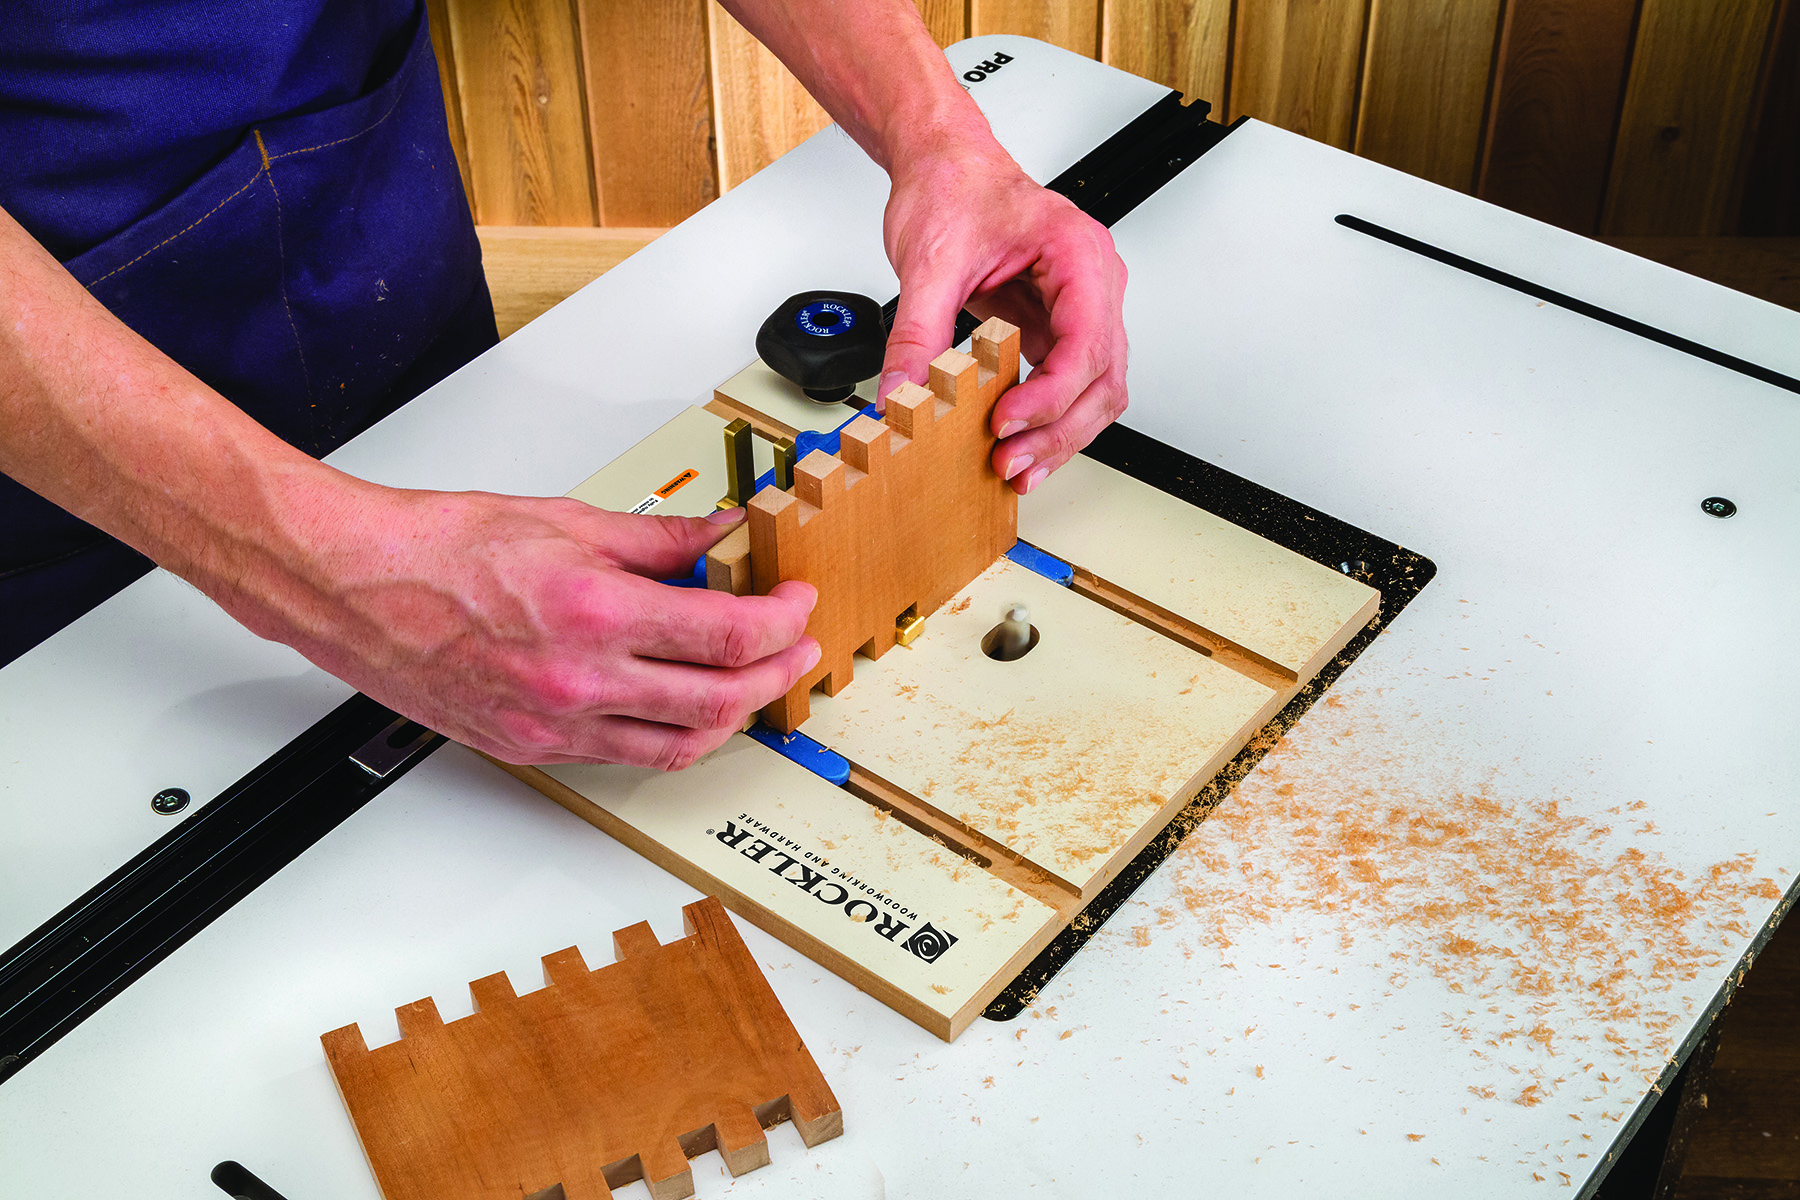 This jig uses precision-machined solid brass indexing keys to ensure uniform finger spacing and an airtight fit.